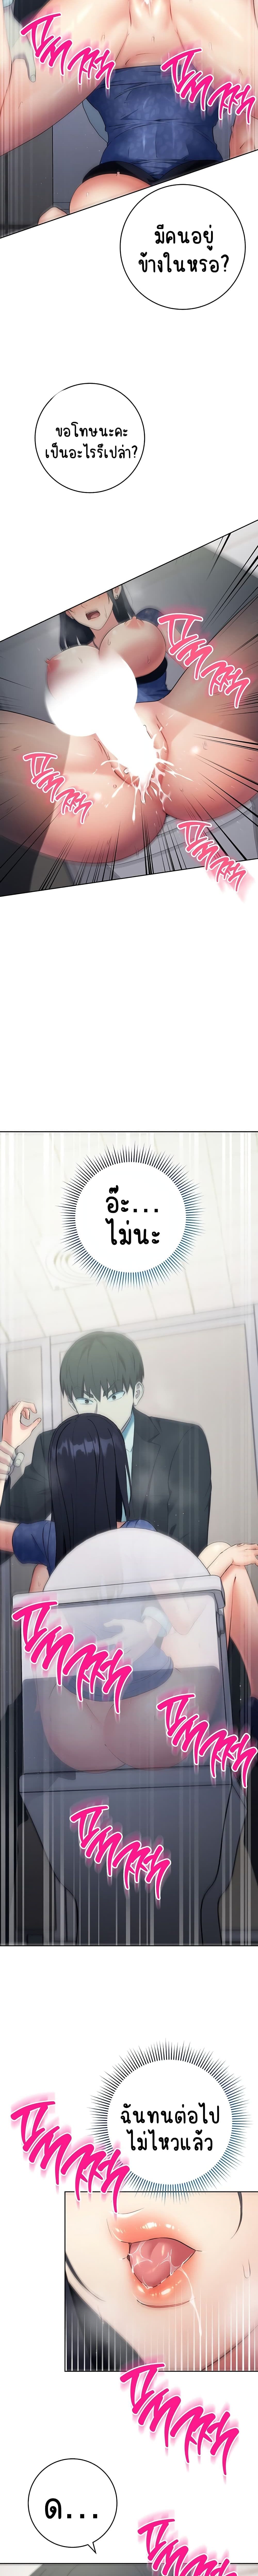 Outsider: The Invisible Man ตอนที่ 6 ภาพ 15